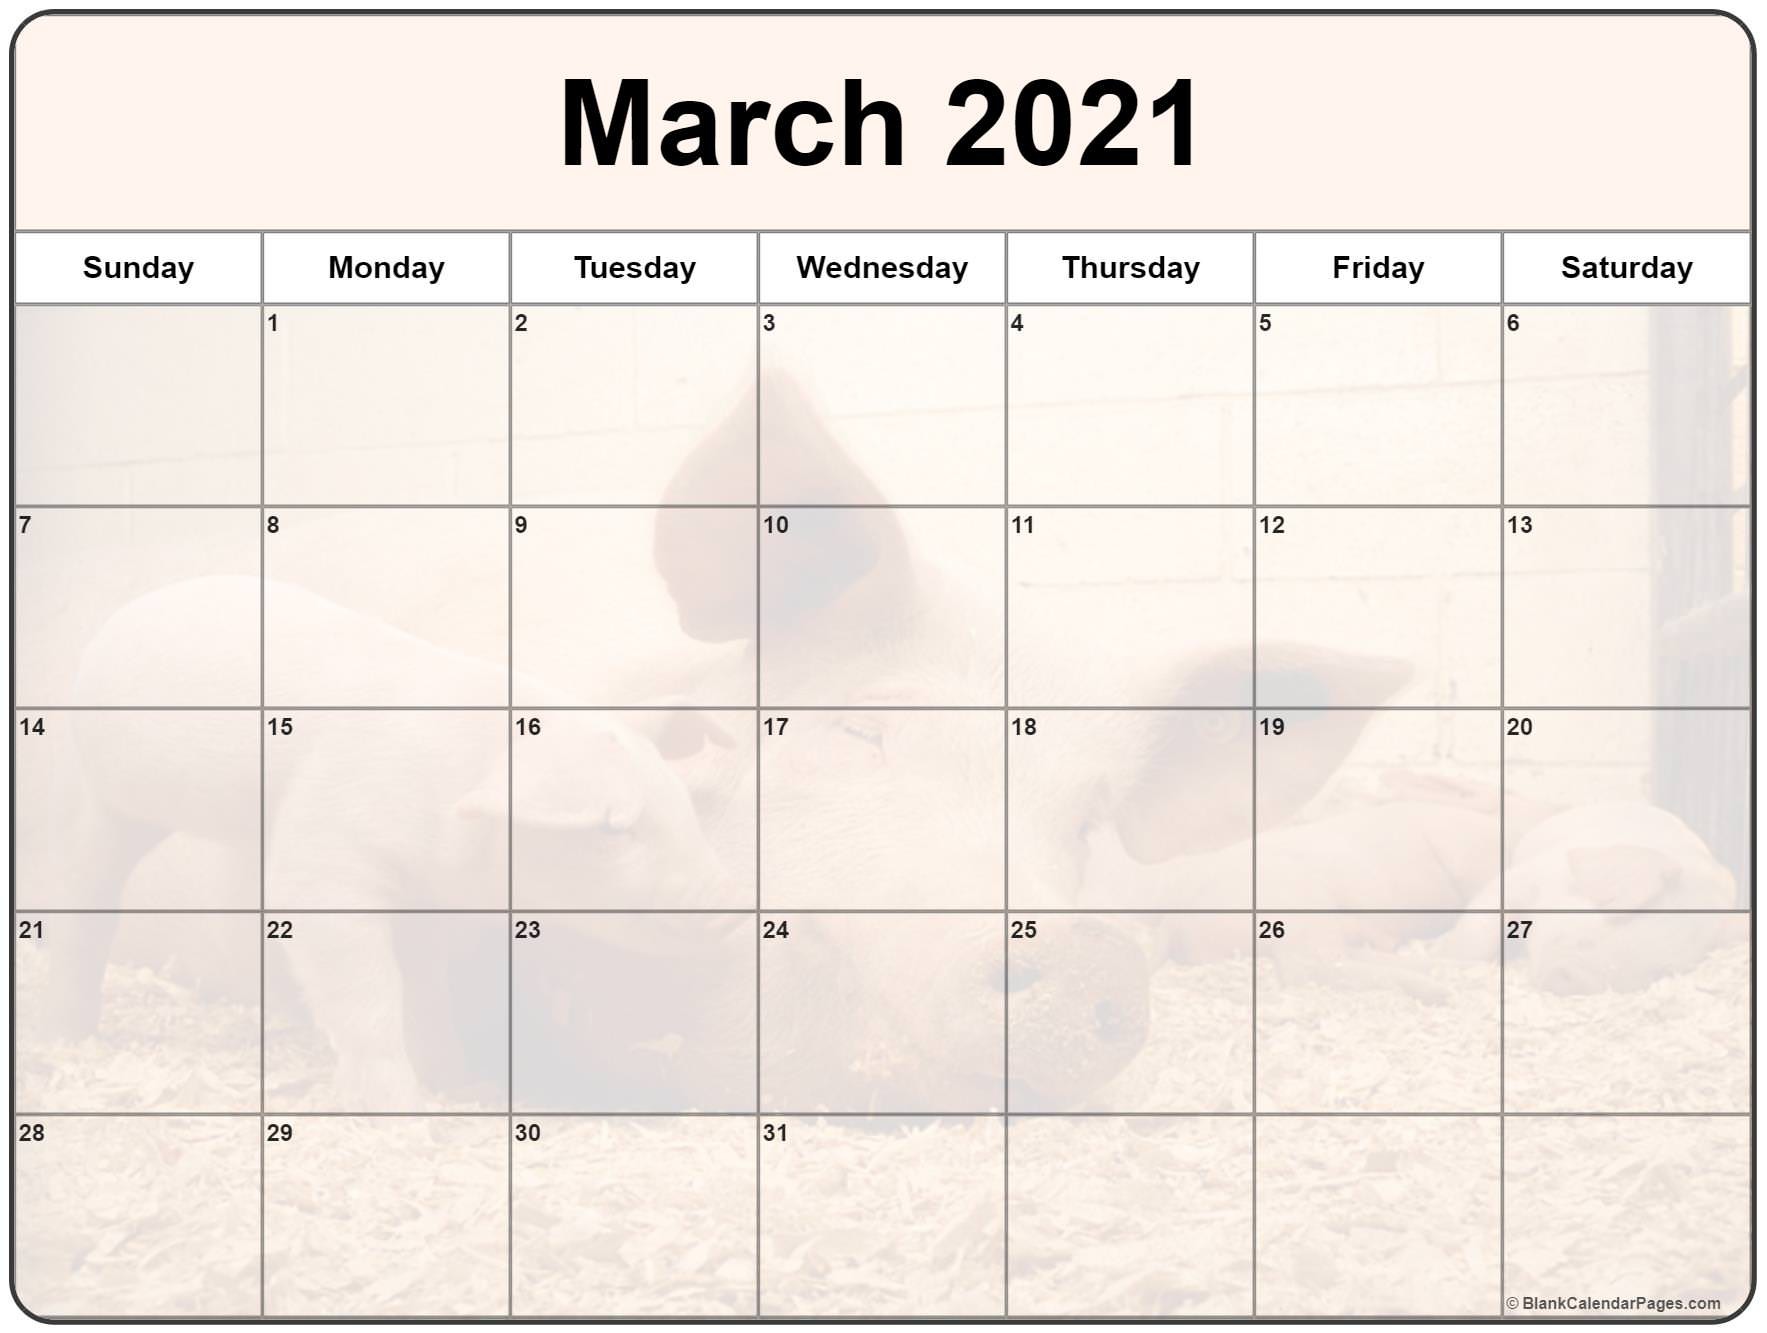 collection of march 2021 photo calendars with image filters